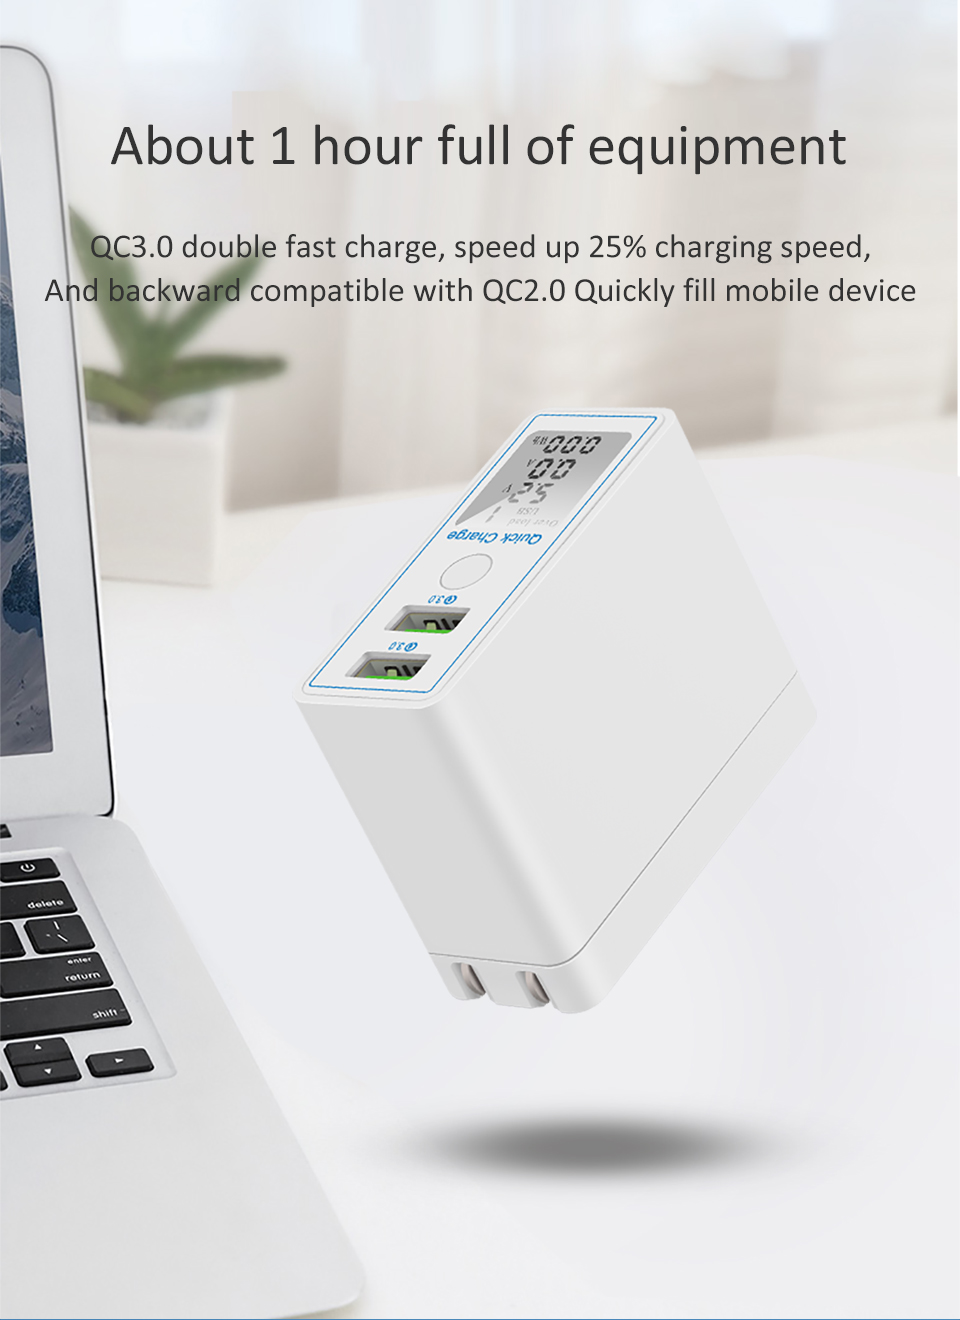 Bakeey-36W-QC30-Dual-USB-LED-Display-Fast-Charging-USB-Charger-For-iPhone-XS-11Pro-Huawei-P30-Pro-P4-1663234-6